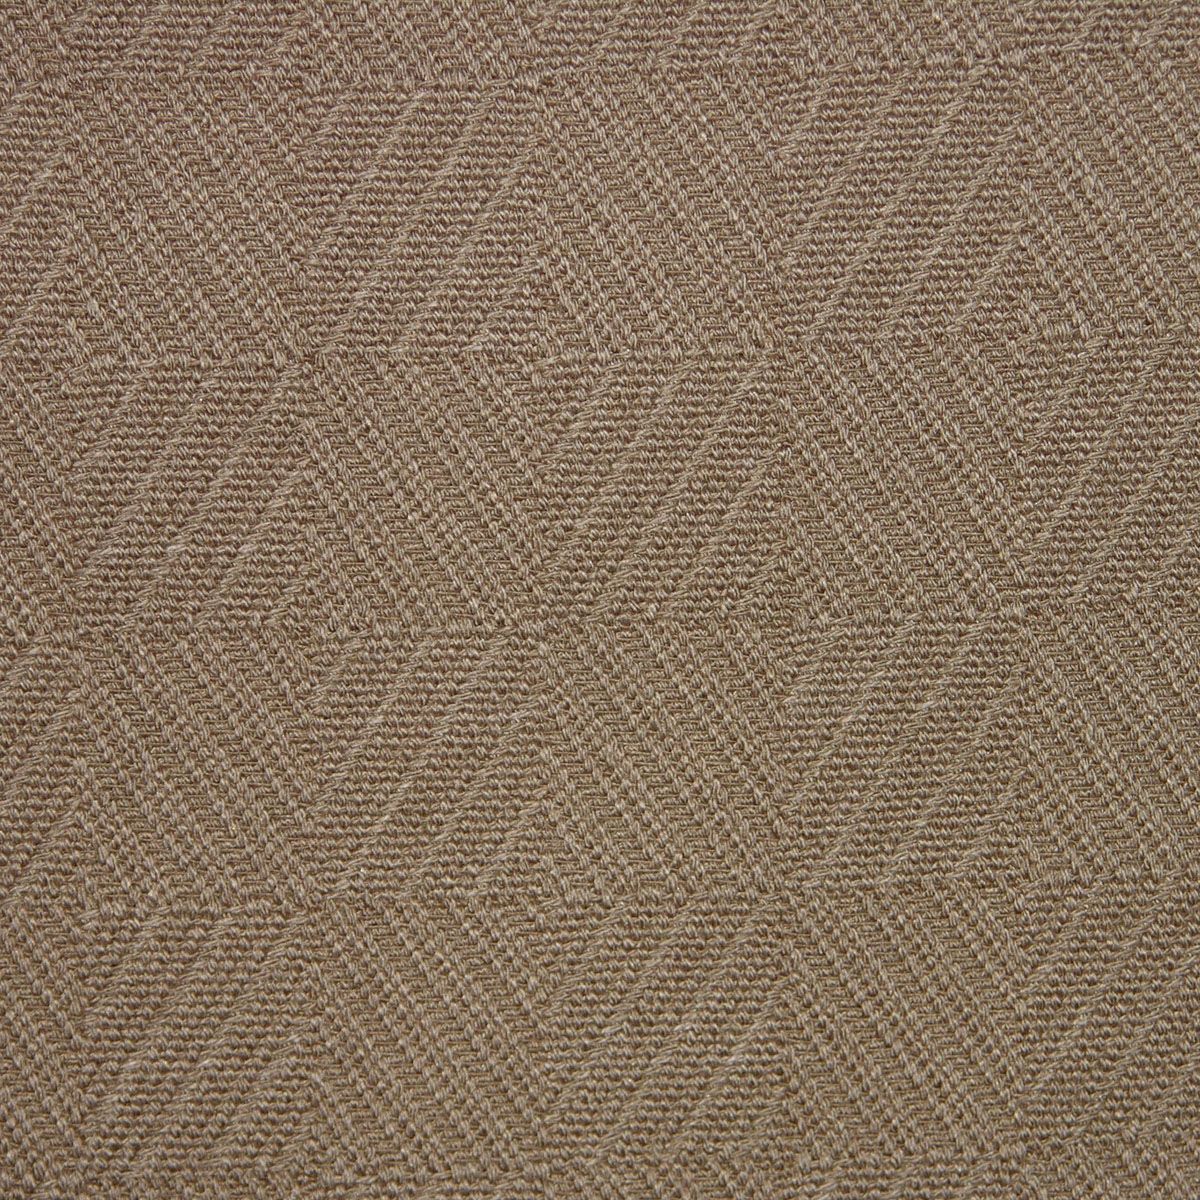 Marigot fabric in mocha color - pattern number LT 00067602 - by Scalamandre in the Old World Weavers collection